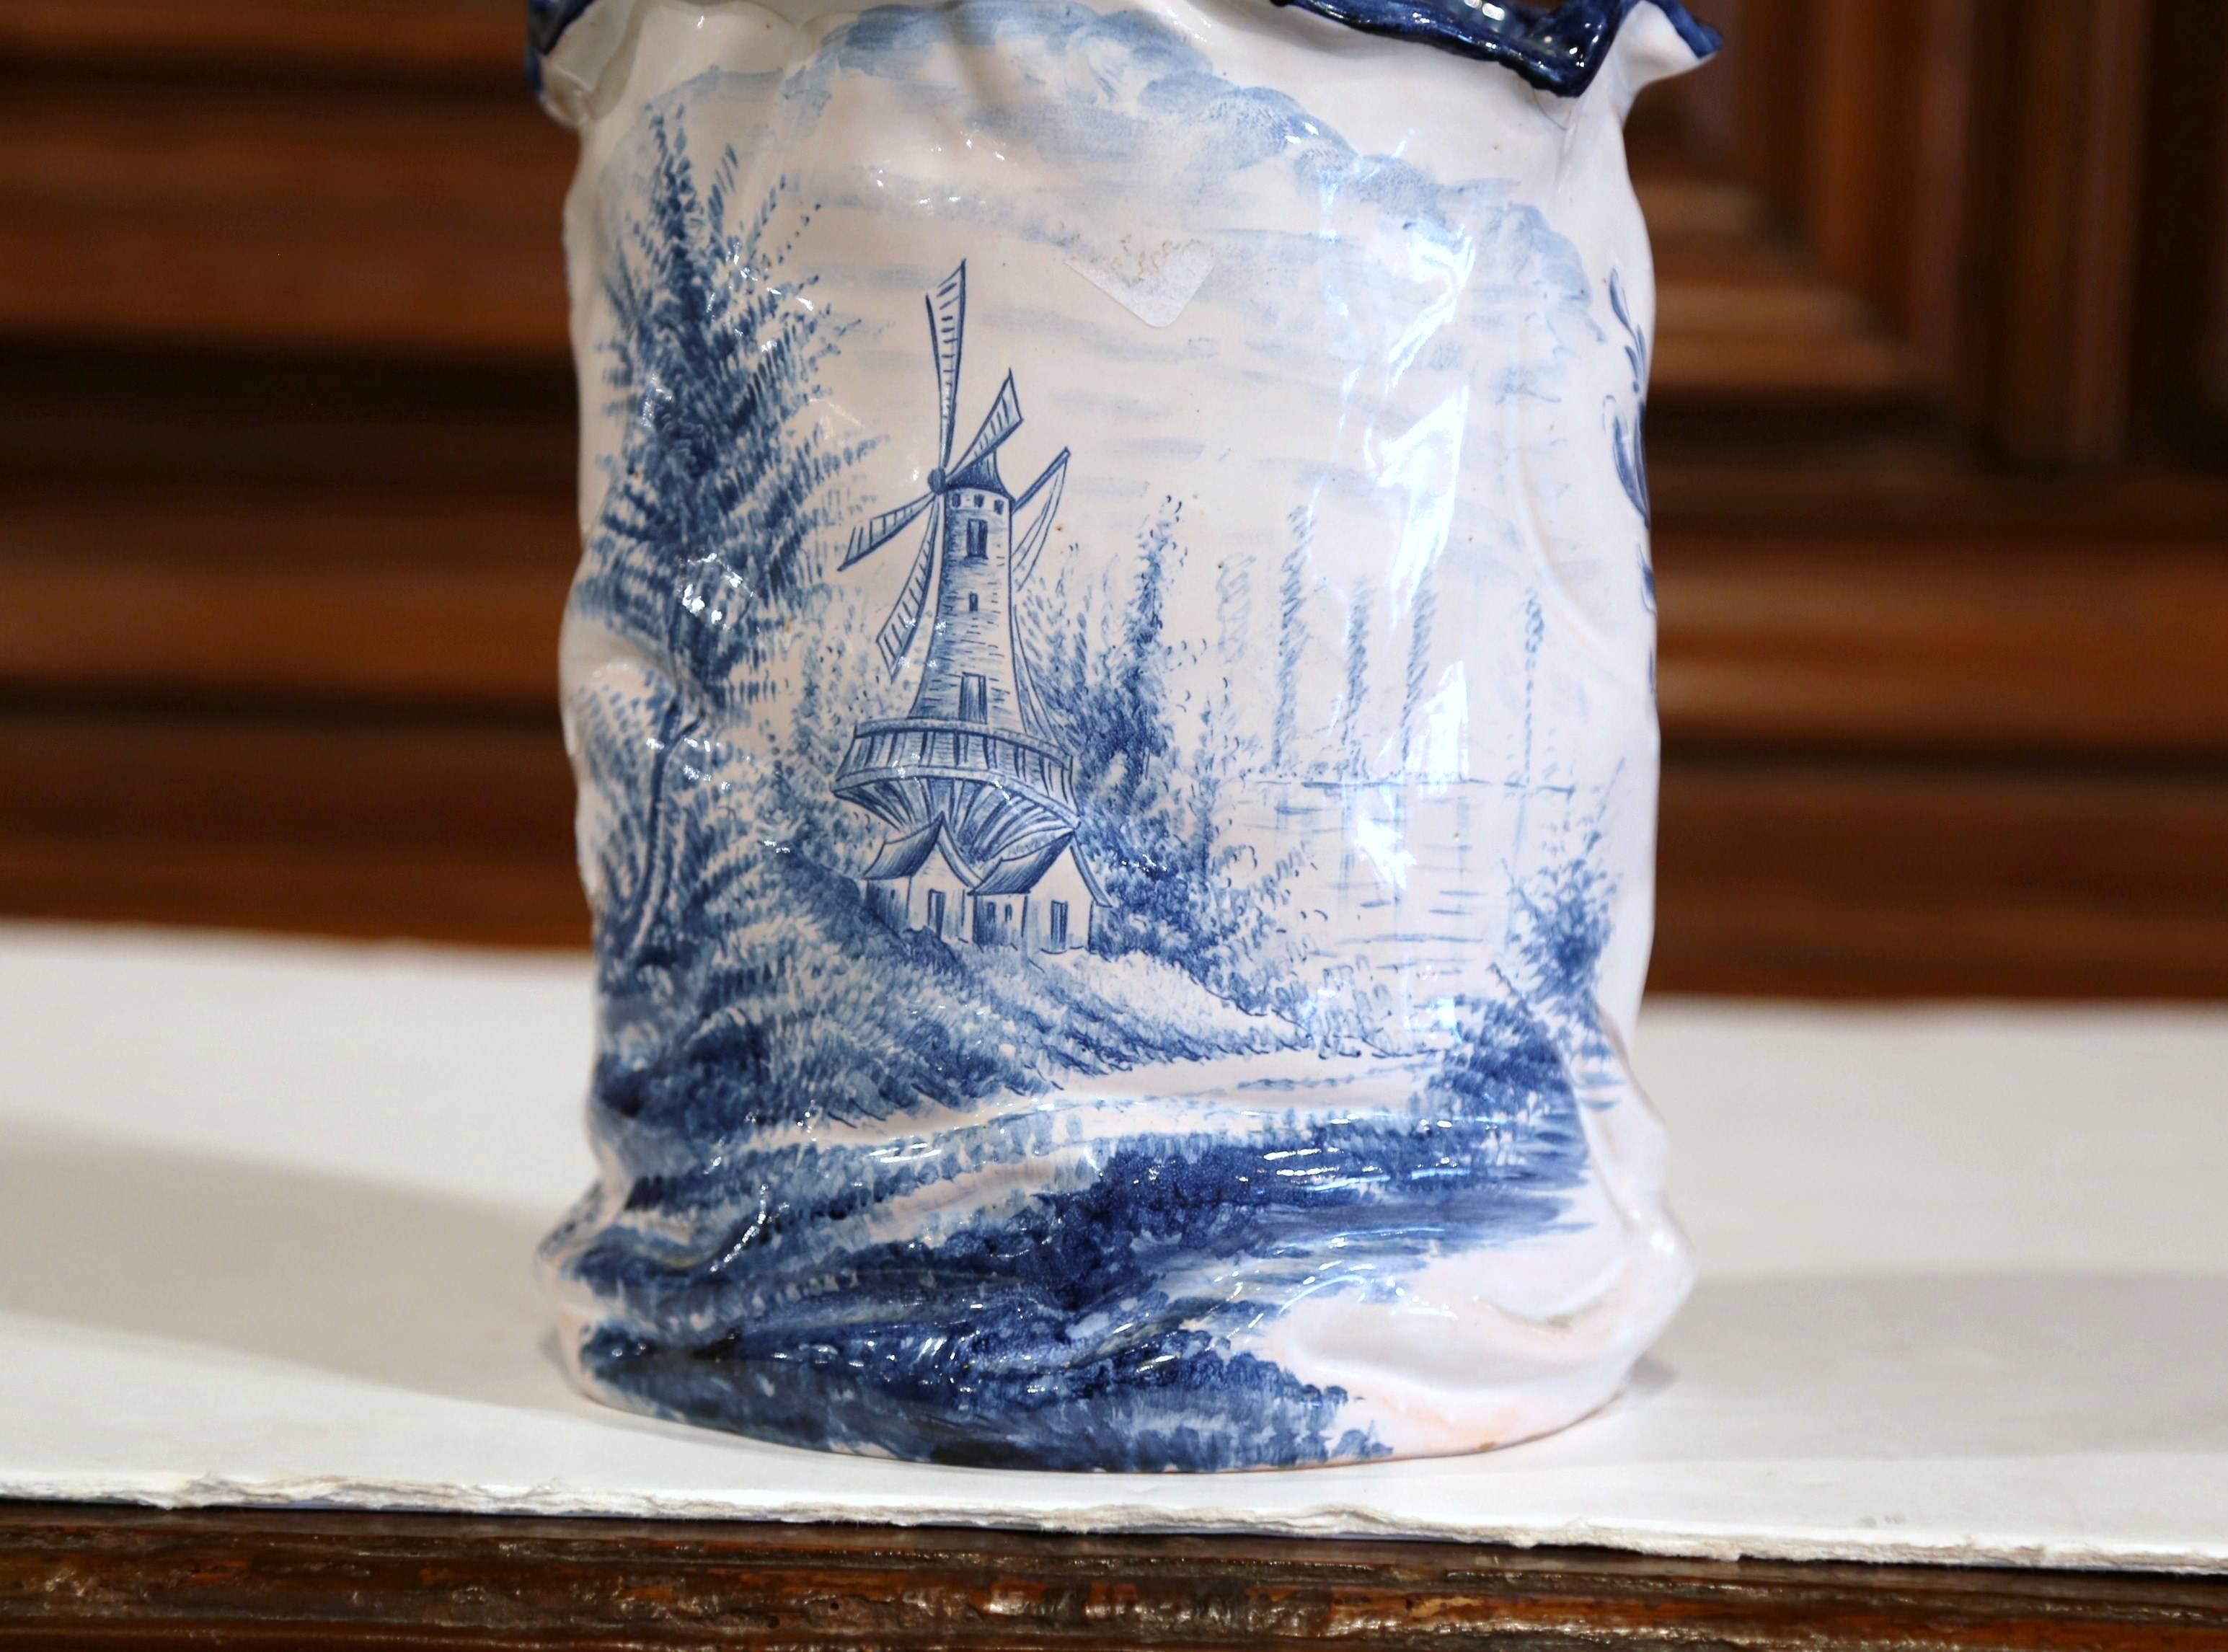 This antique planter was created in France, circa 1950. Hand-painted in a blue and white Delft style, the porcelain cache pot has an oval shape and features the traditional windmill on one side and fisherman in his boat on the other. The classic